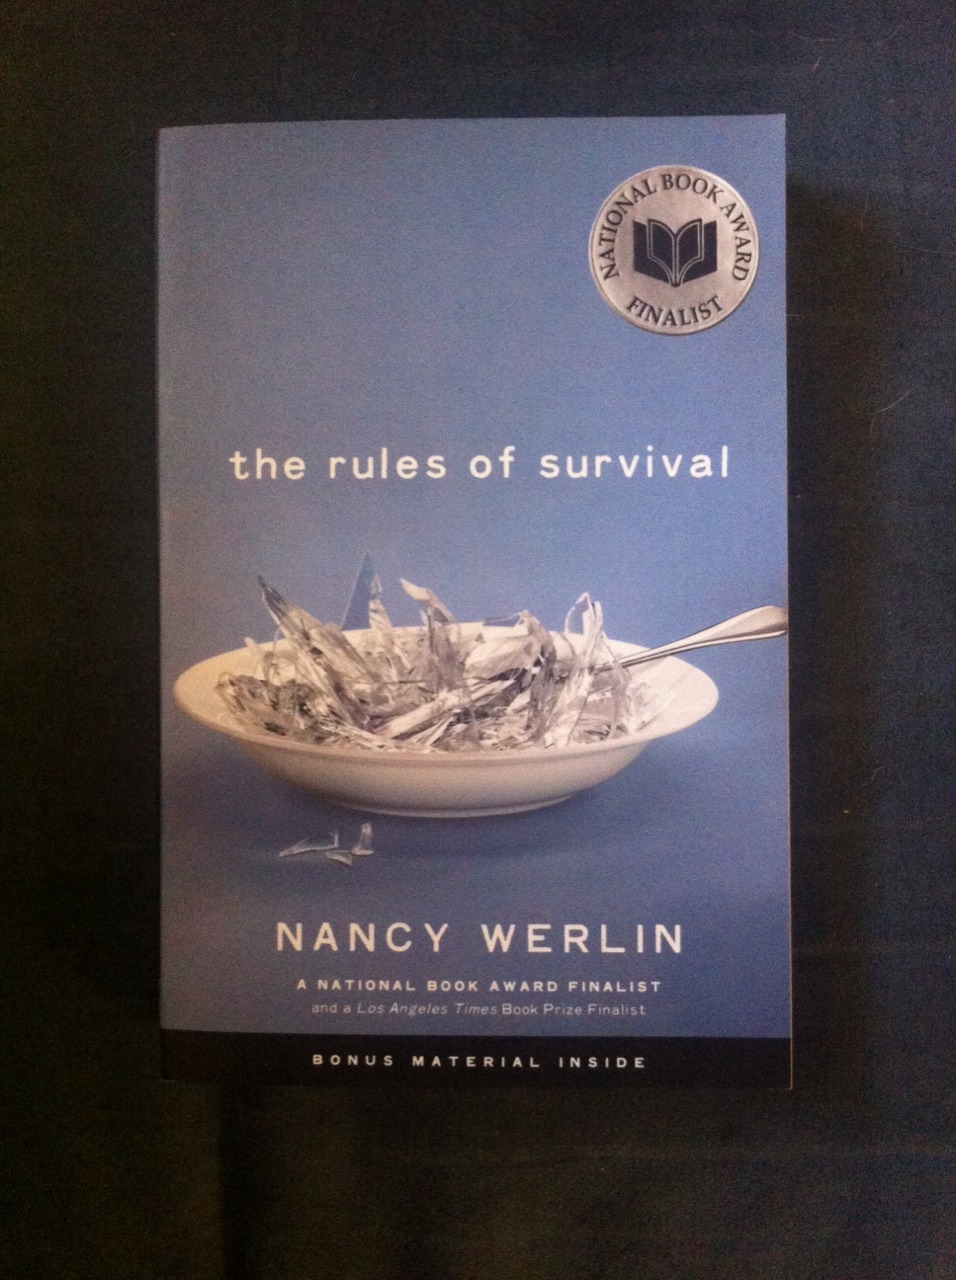 The Rules of Survival by Nancy Werlin